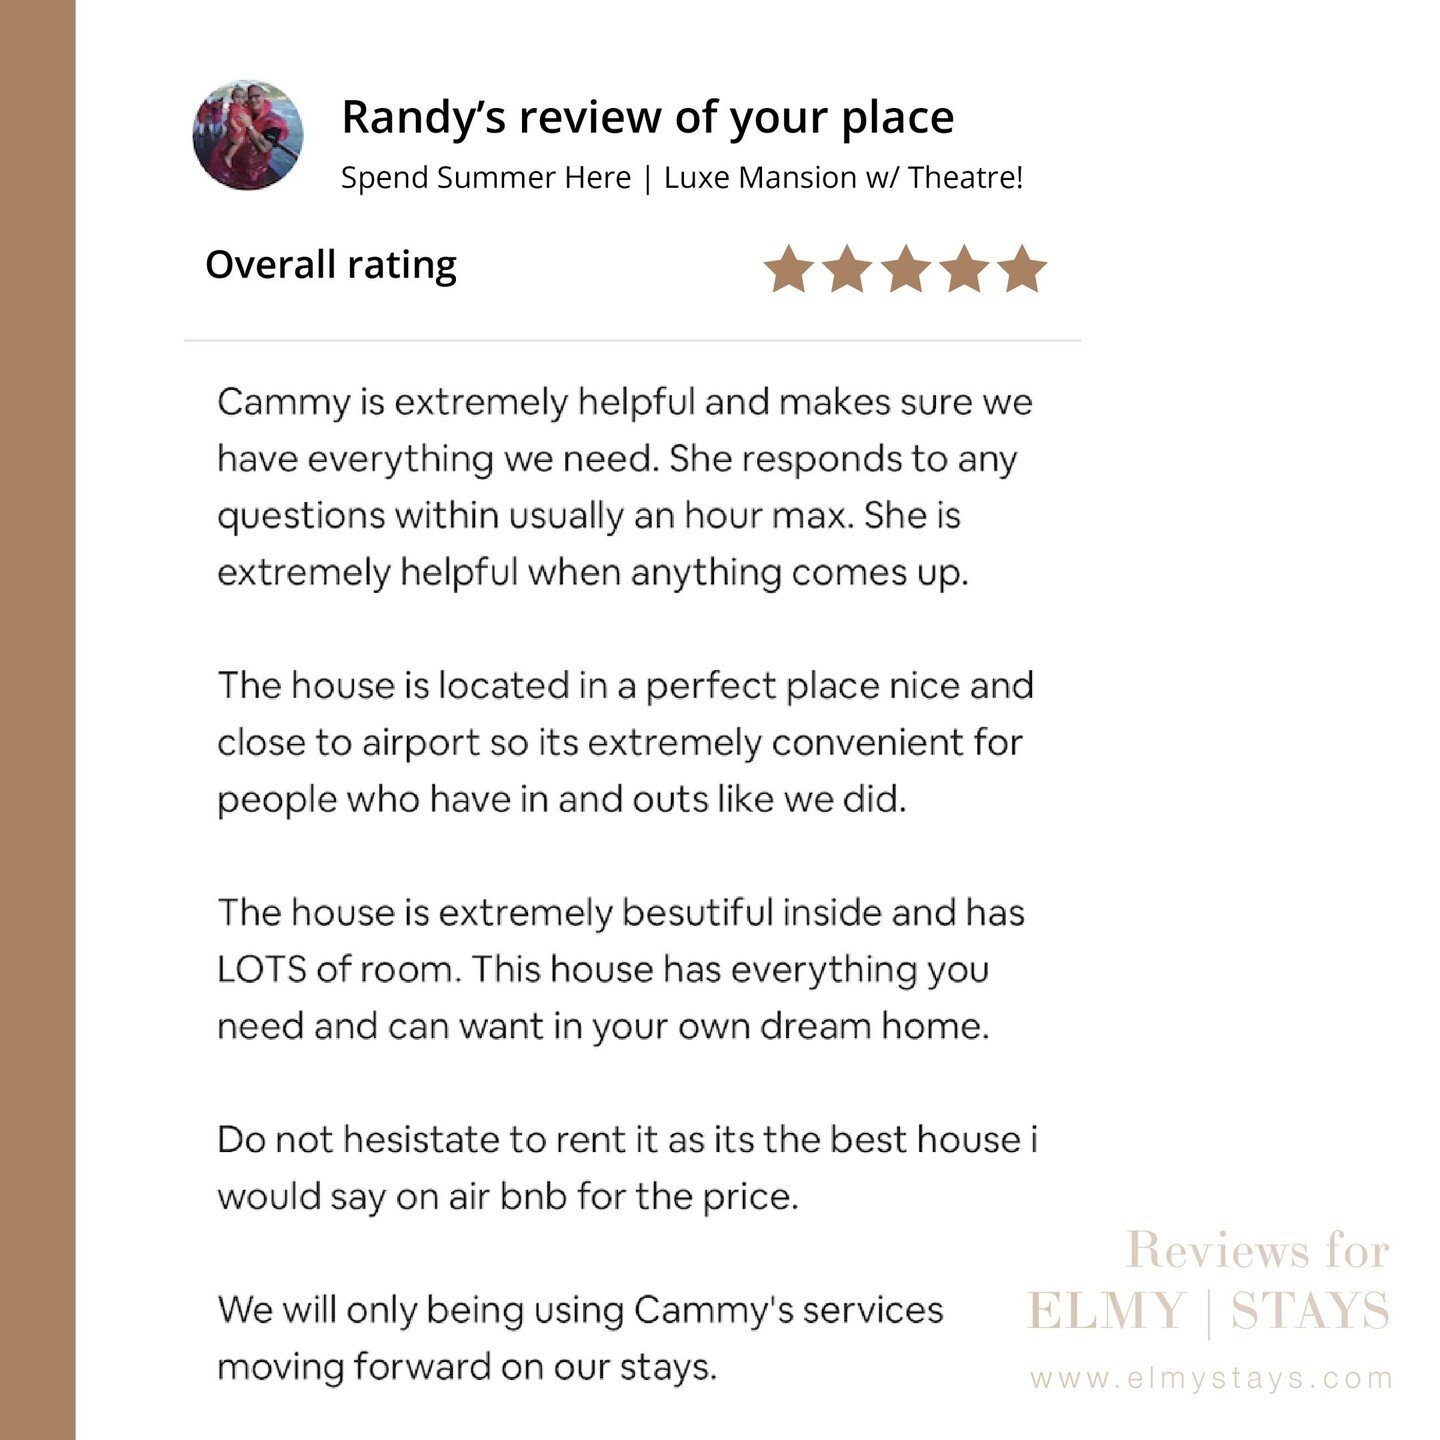 ⁠⭐️⭐️⭐️⭐️⭐️ A 5 Star Review from Randy!⁠
⁠
Randy stayed with us a while ago at our Richmond Luxury Mansion. We are glad to see you enjoyed your experience with us, and we are proud to say this home is really stunning!⁠
⁠
This Mansion is a rare + one-